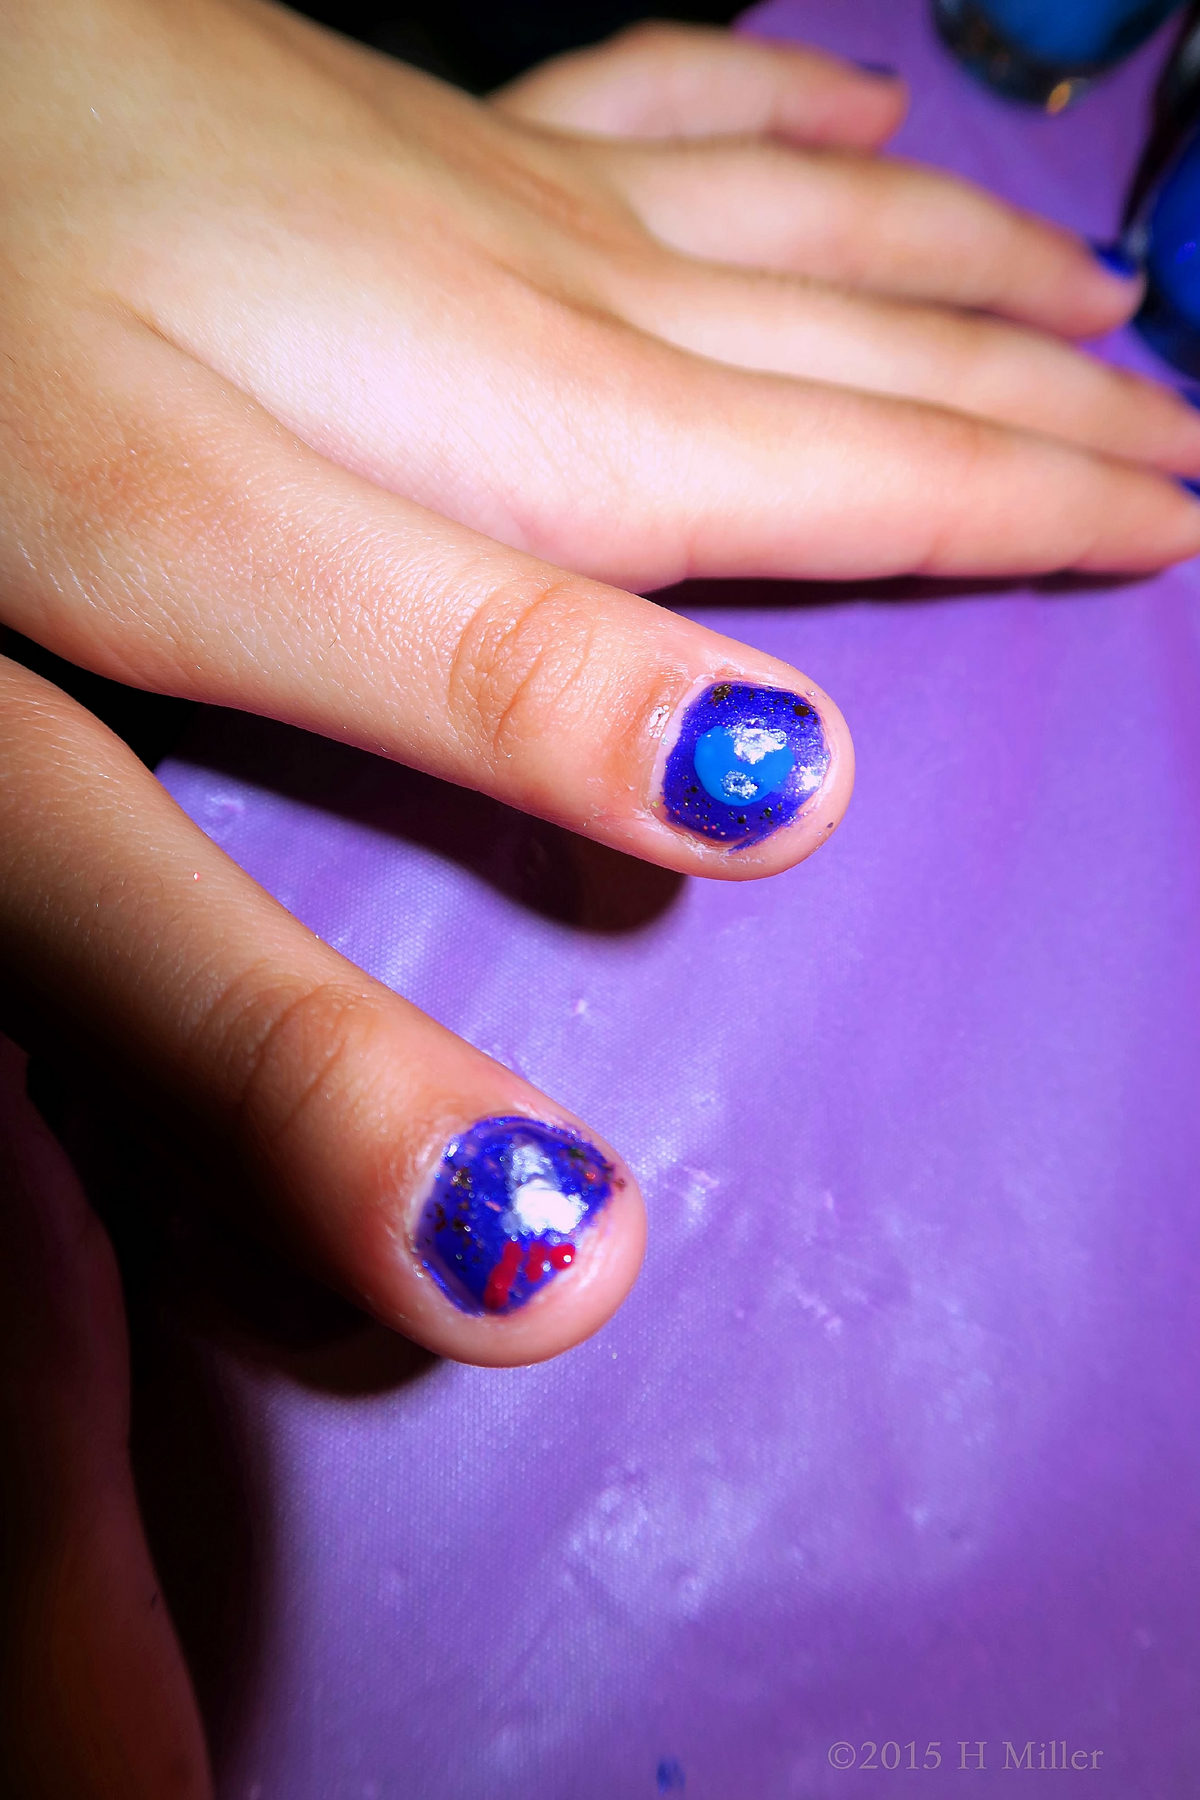 A Rocket. The Planet Earth. All On A Kid's Nails!! lol 